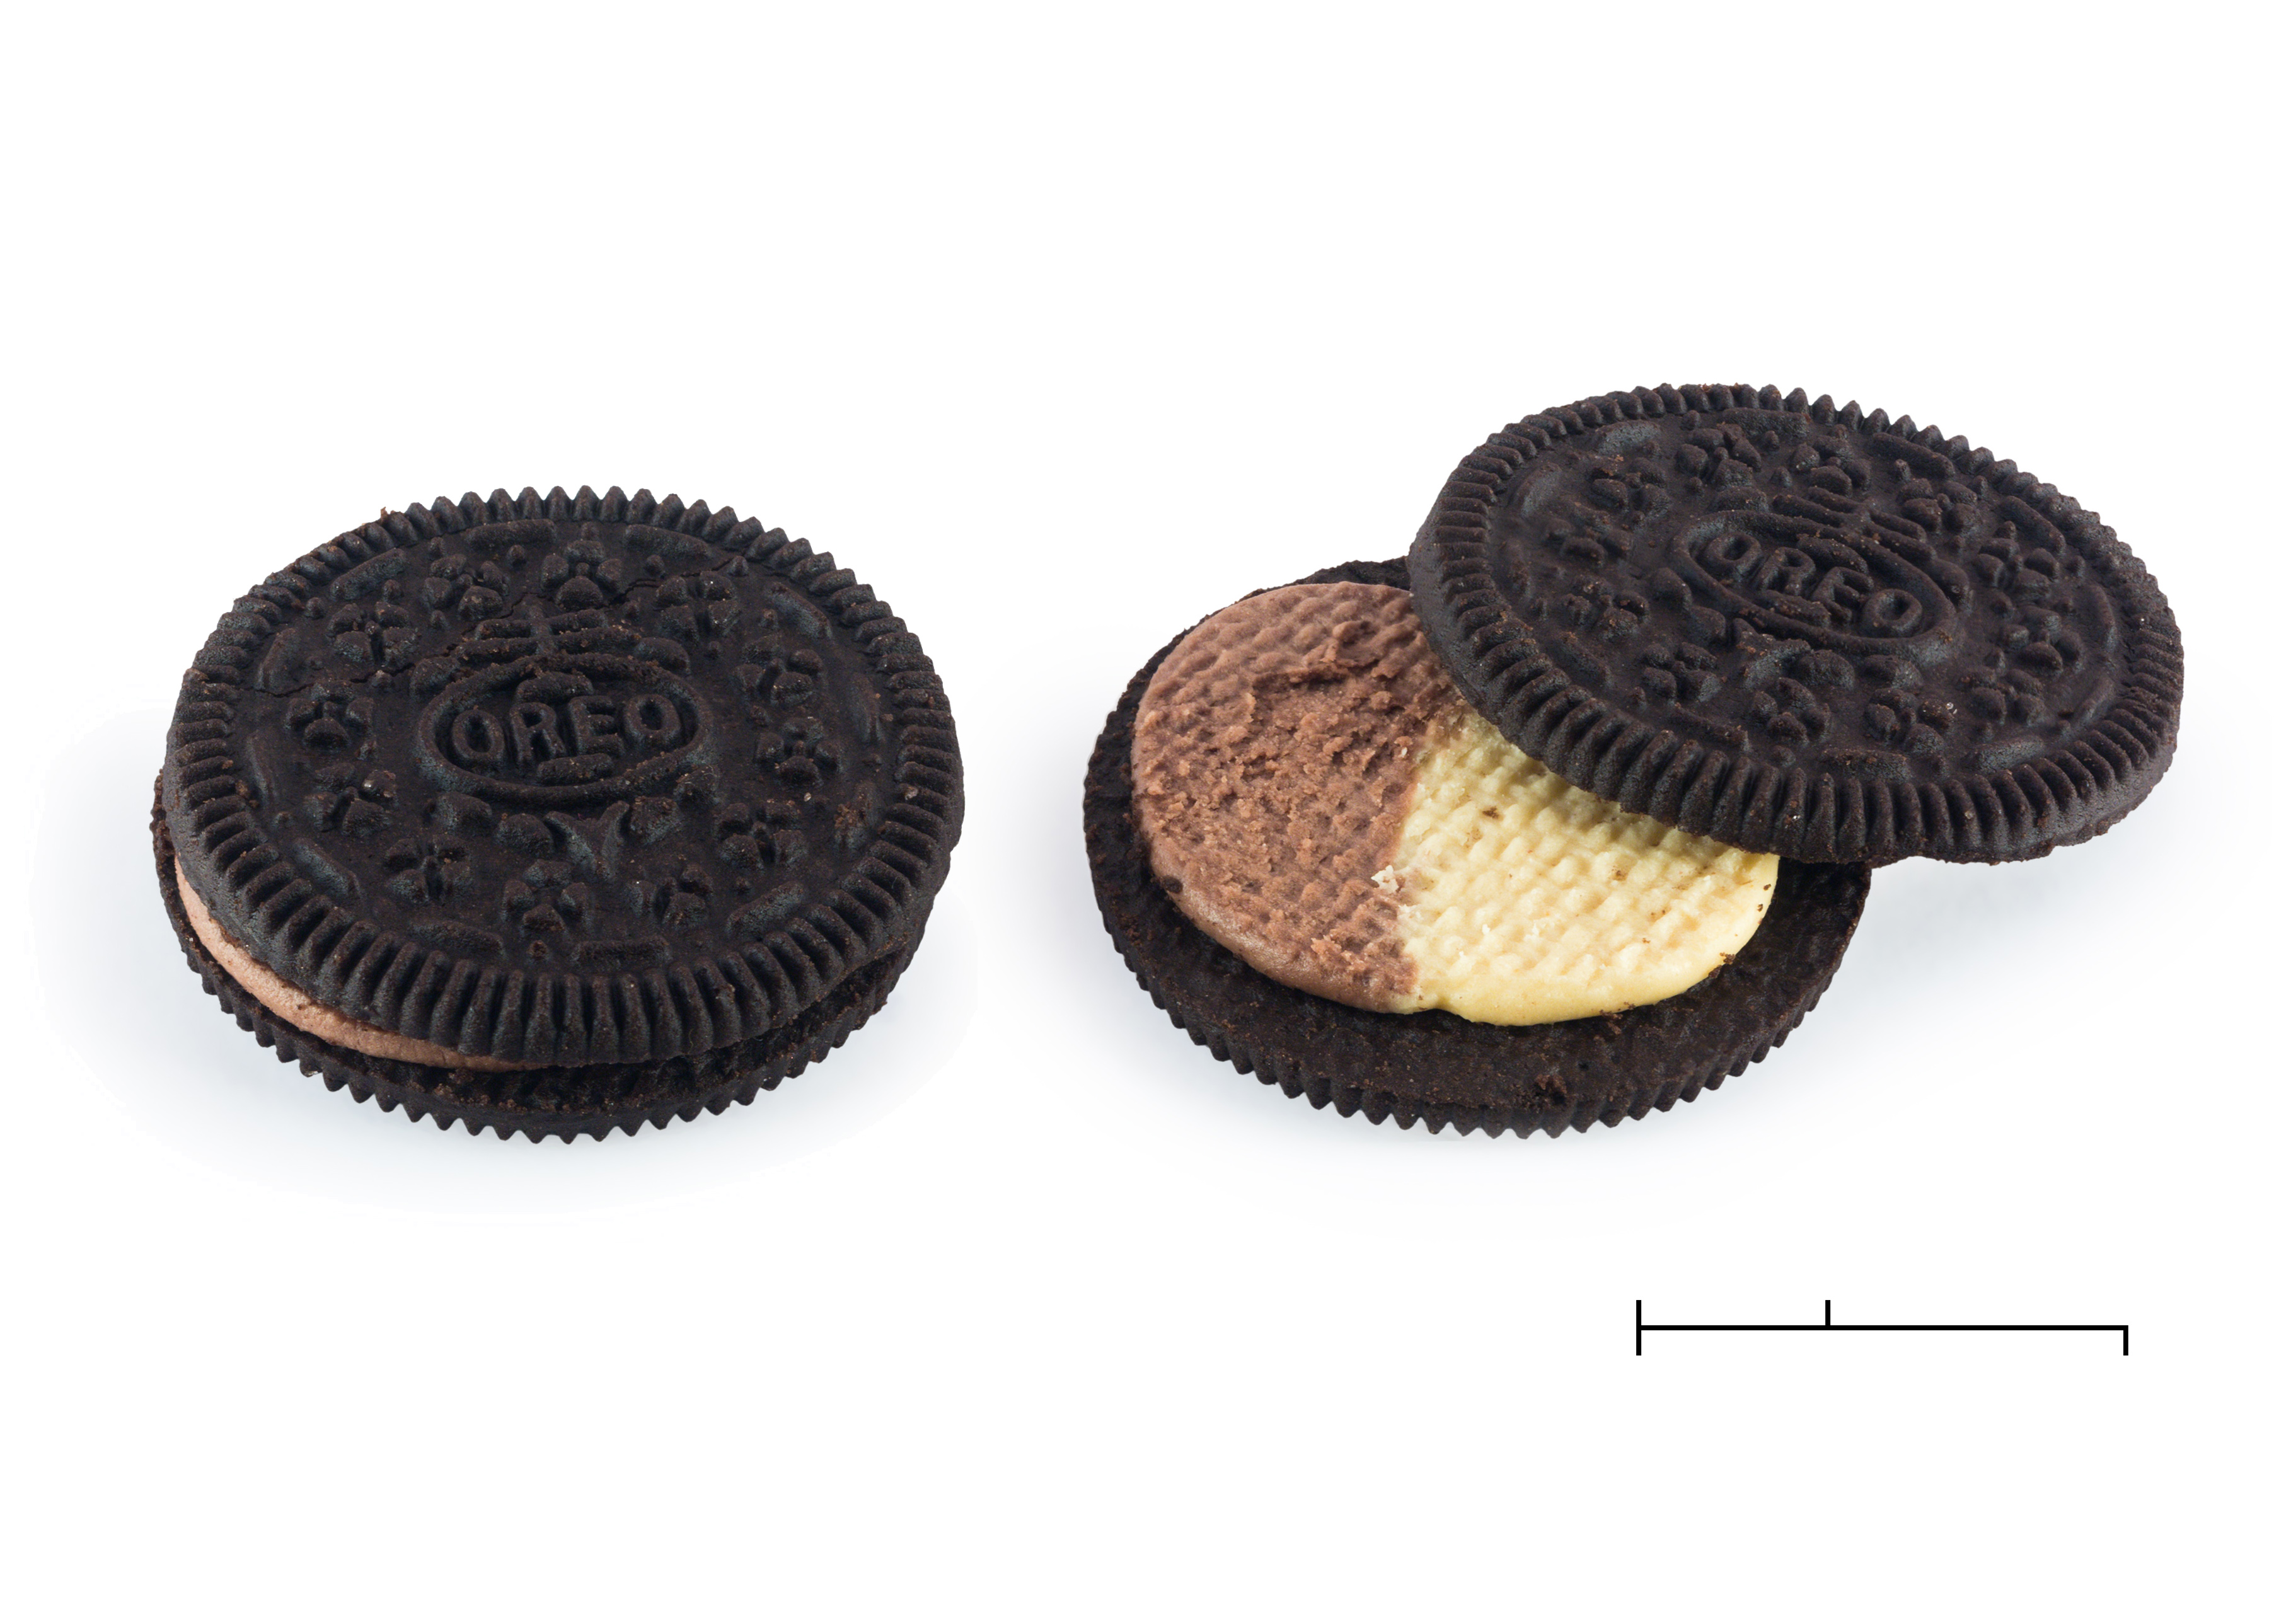 Peanut butter and chocolate oreos, 2015-06-06